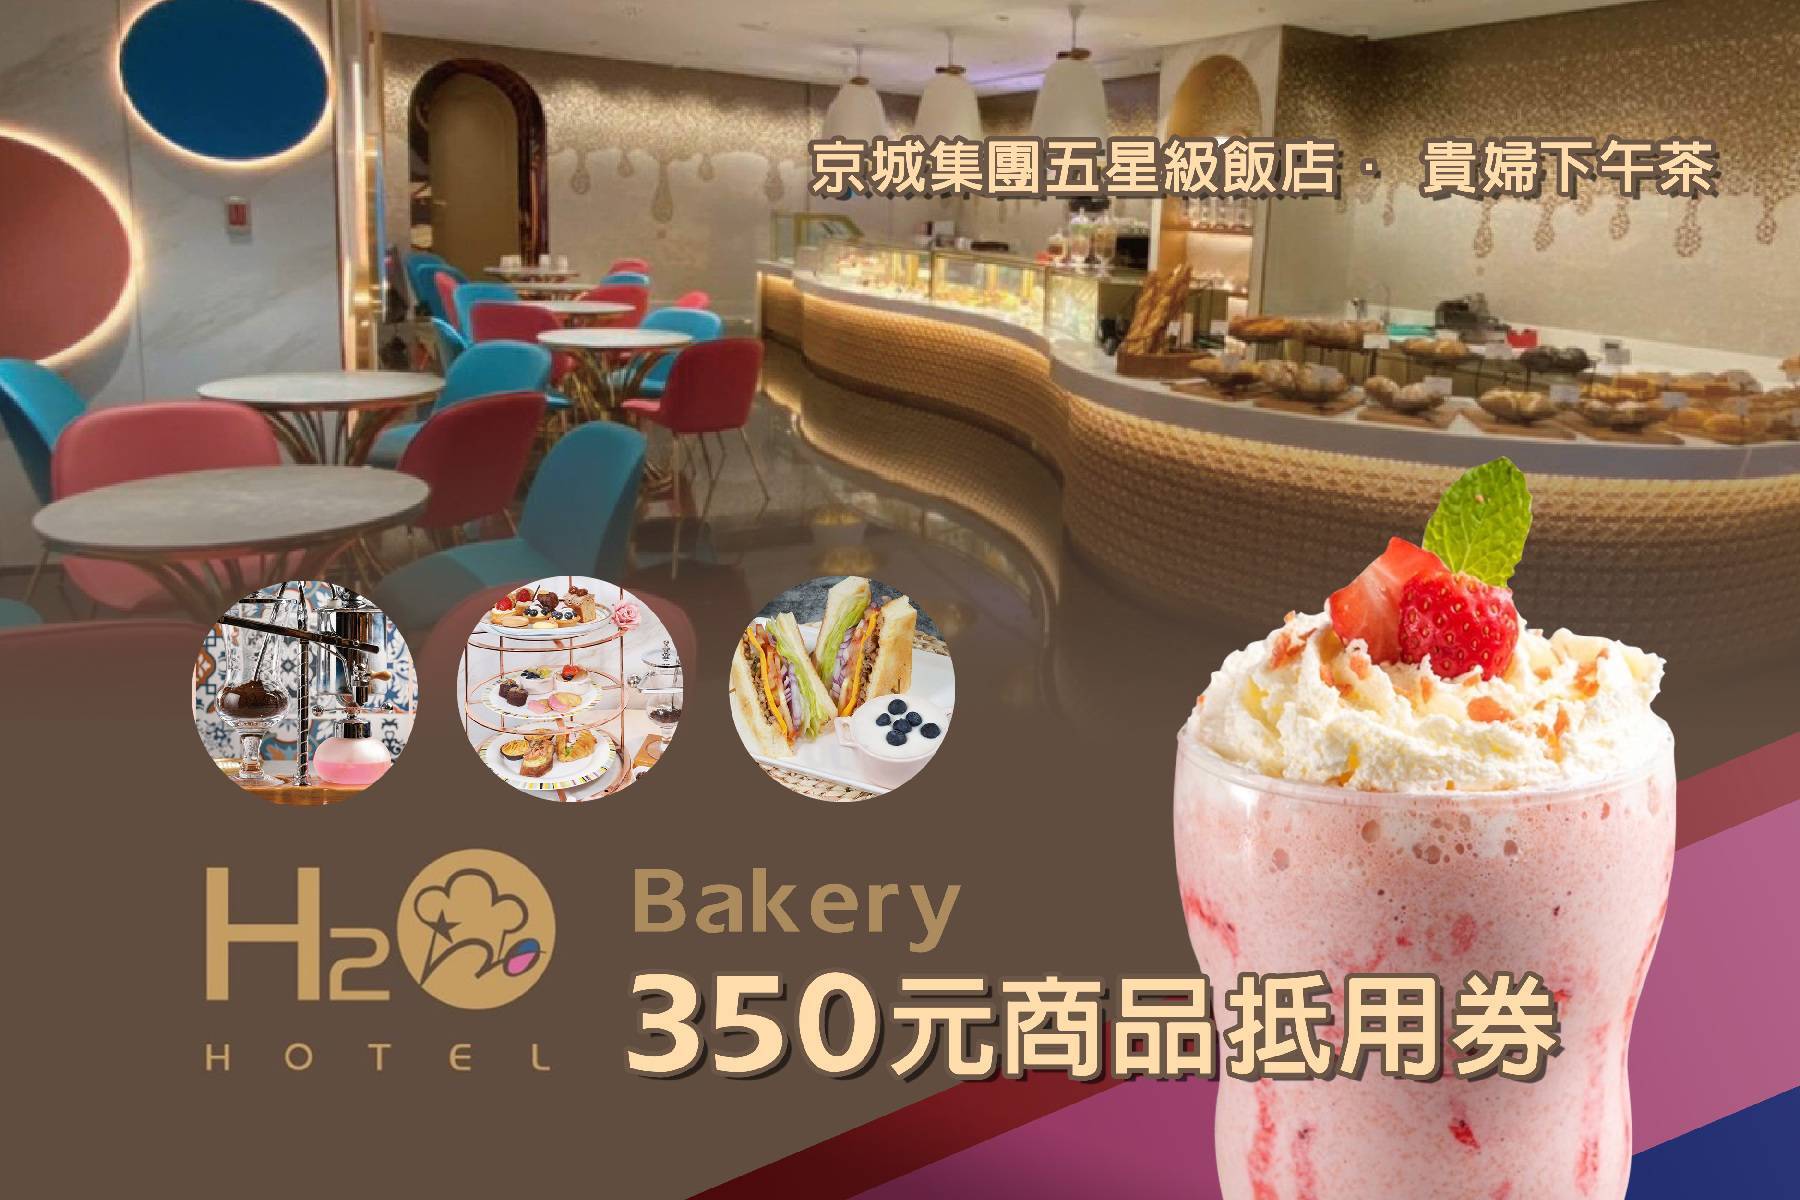 H2O Bakery-350元商品抵用券1